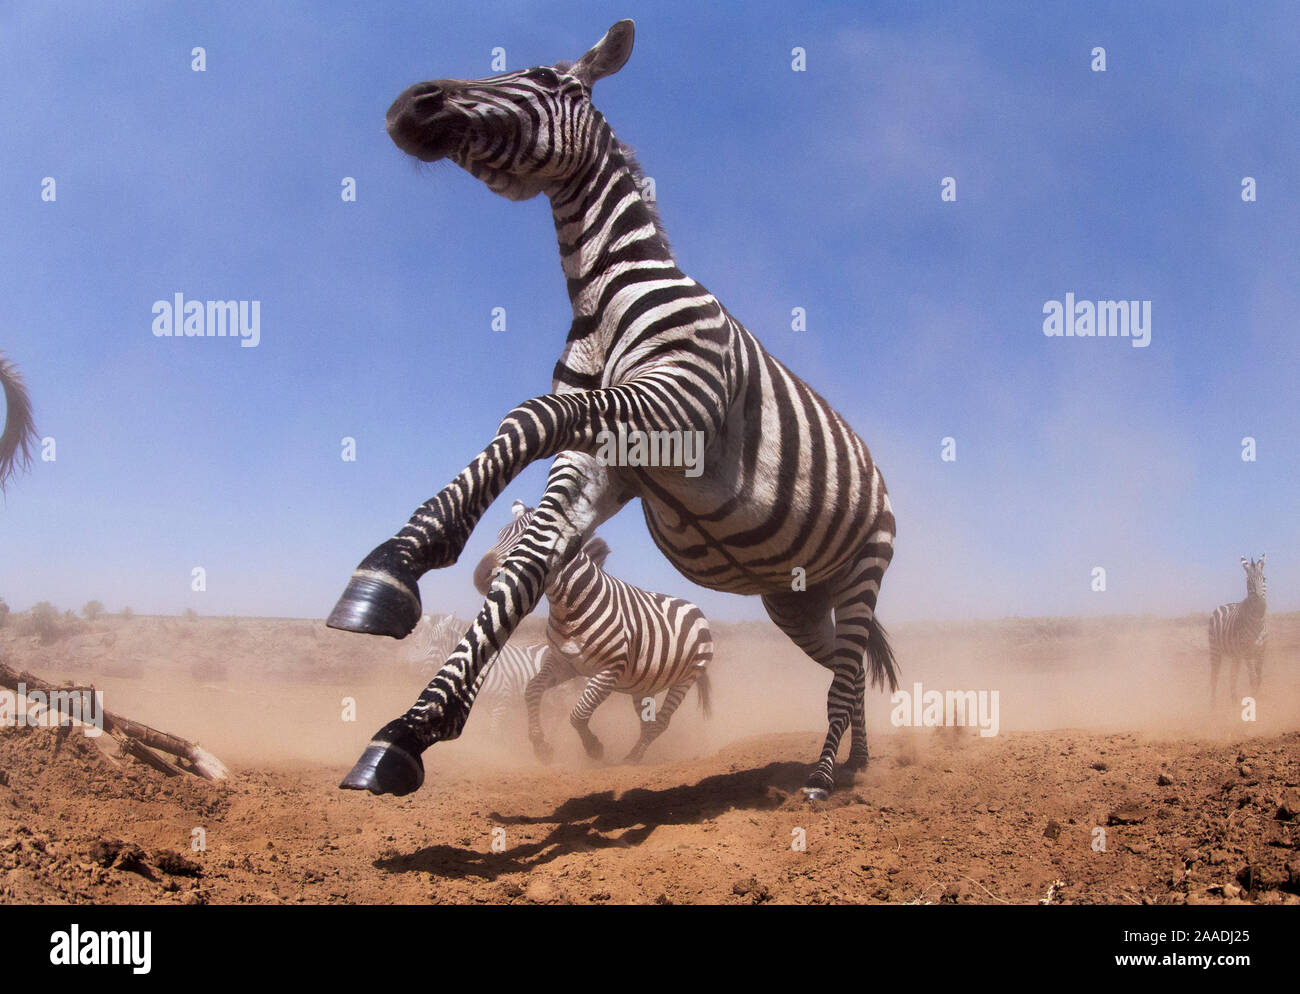 Common or plains zebra  (Equus quagga burchelli) herd on the move. Taken with a remote camera controlled by the photographer. Maasai Mara National Reserve, Kenya. July 2013. Stock Photo